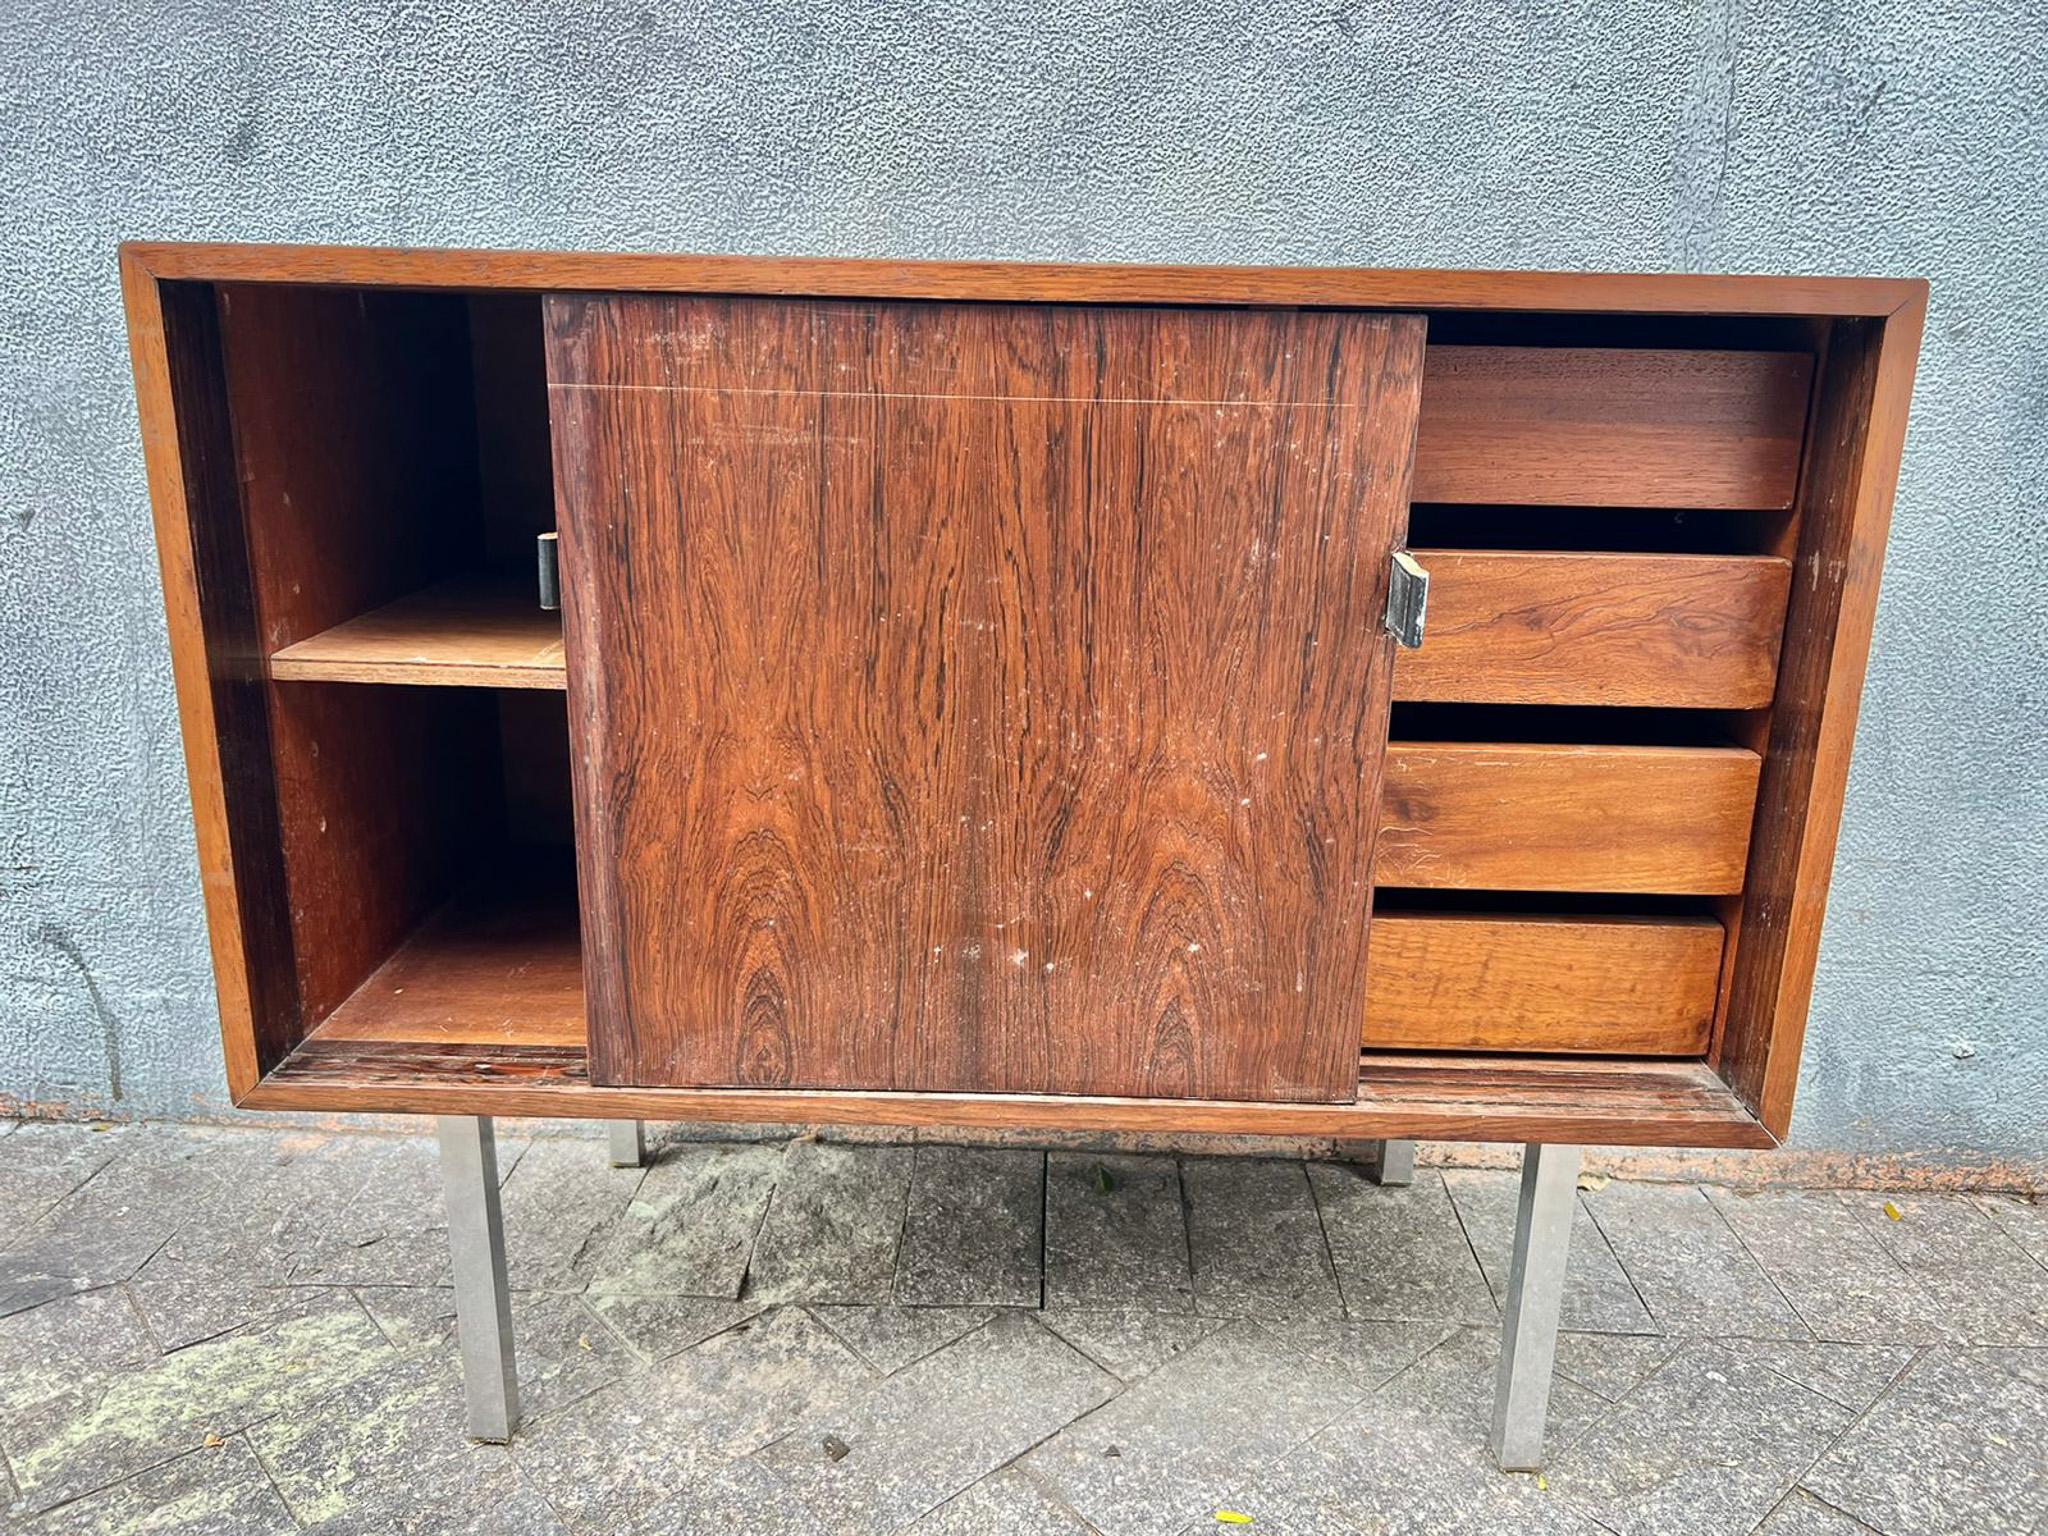 Midcentury Chest in Hardwood & Chrome by Forma Moveis, 1965 Brazil, Sealed For Sale 6